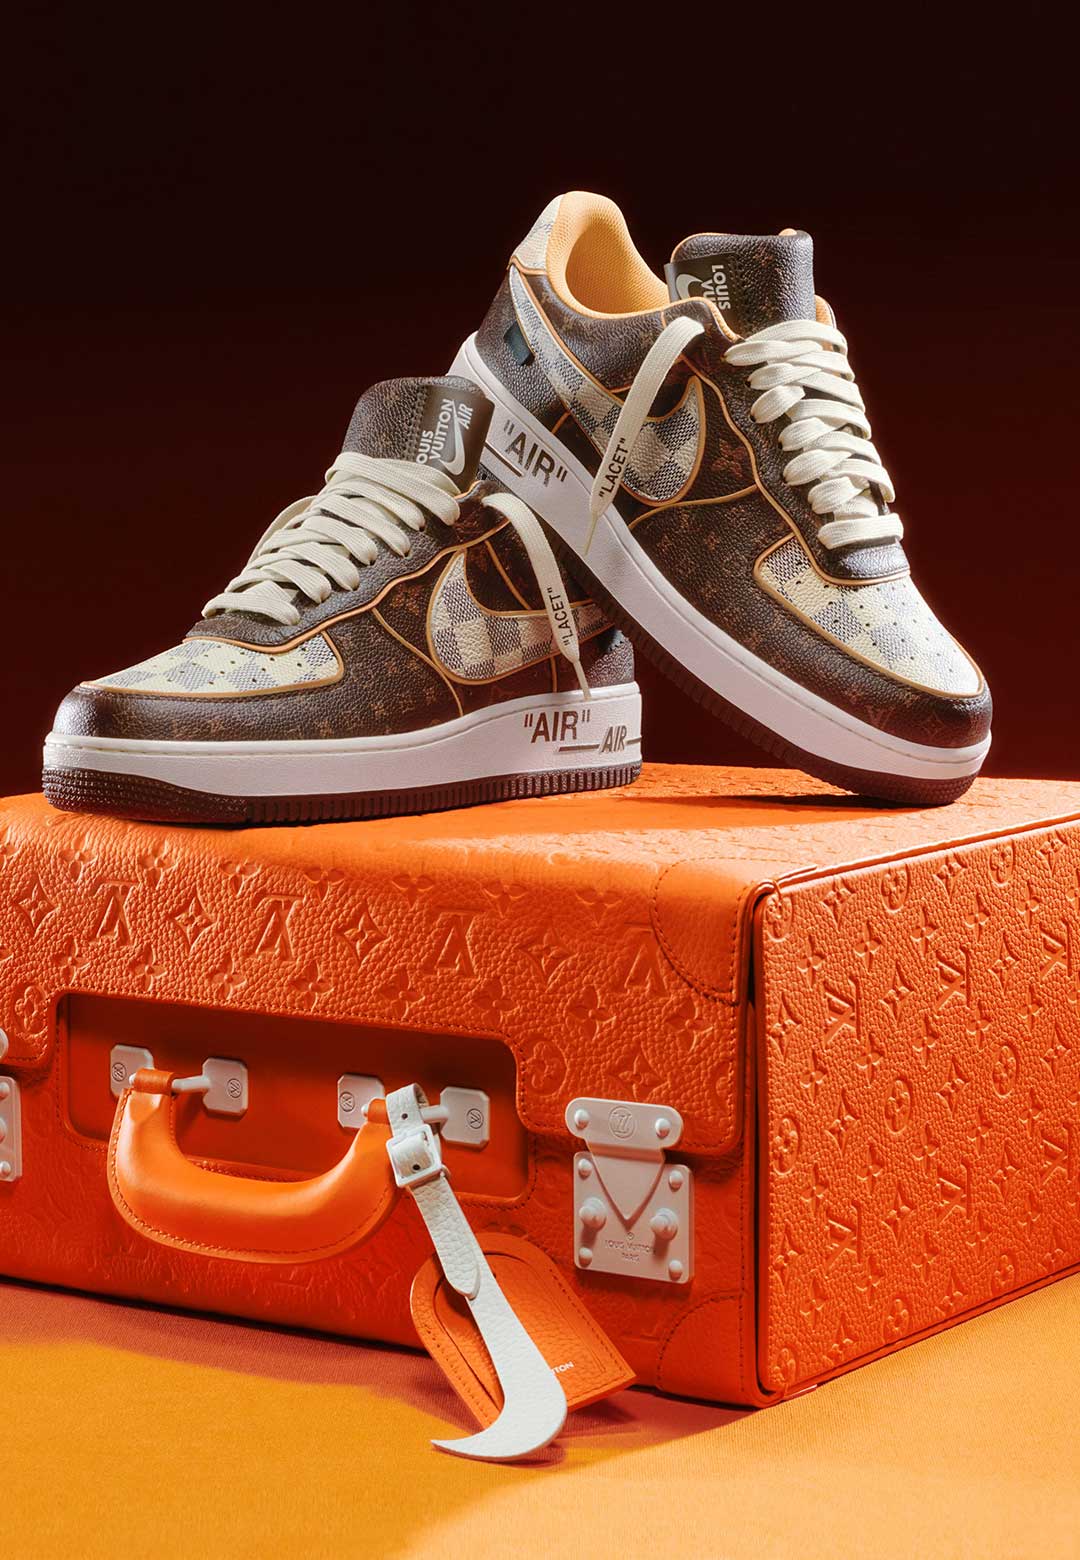 Virgil Abloh's LV x Nike sneakers fetch $25 million at Sotheby's auction